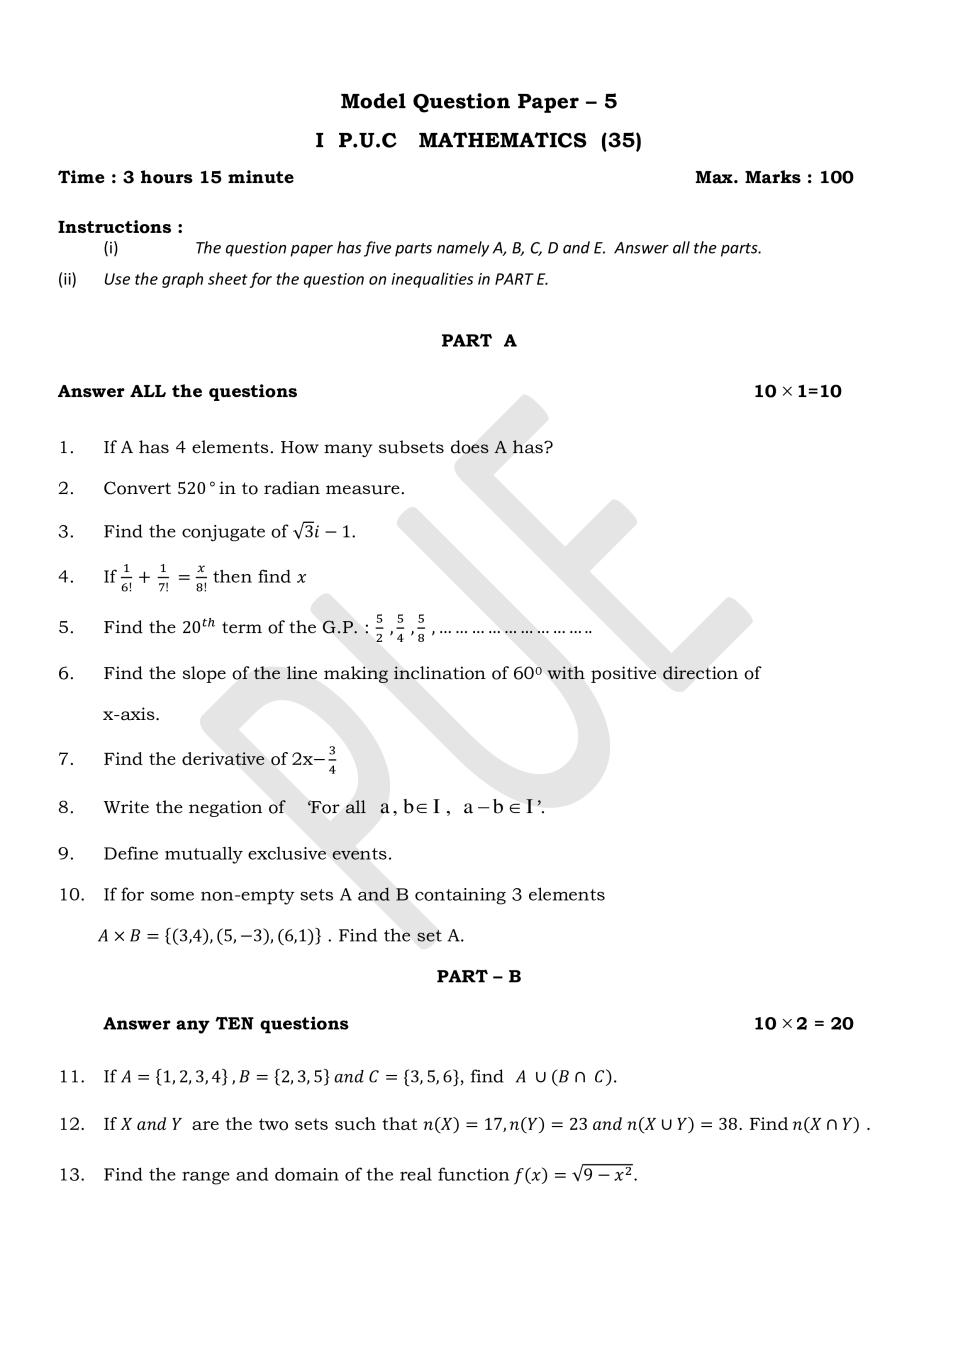 Karnataka 1st PUC Model Question Paper for Maths Set 5 - Page 1